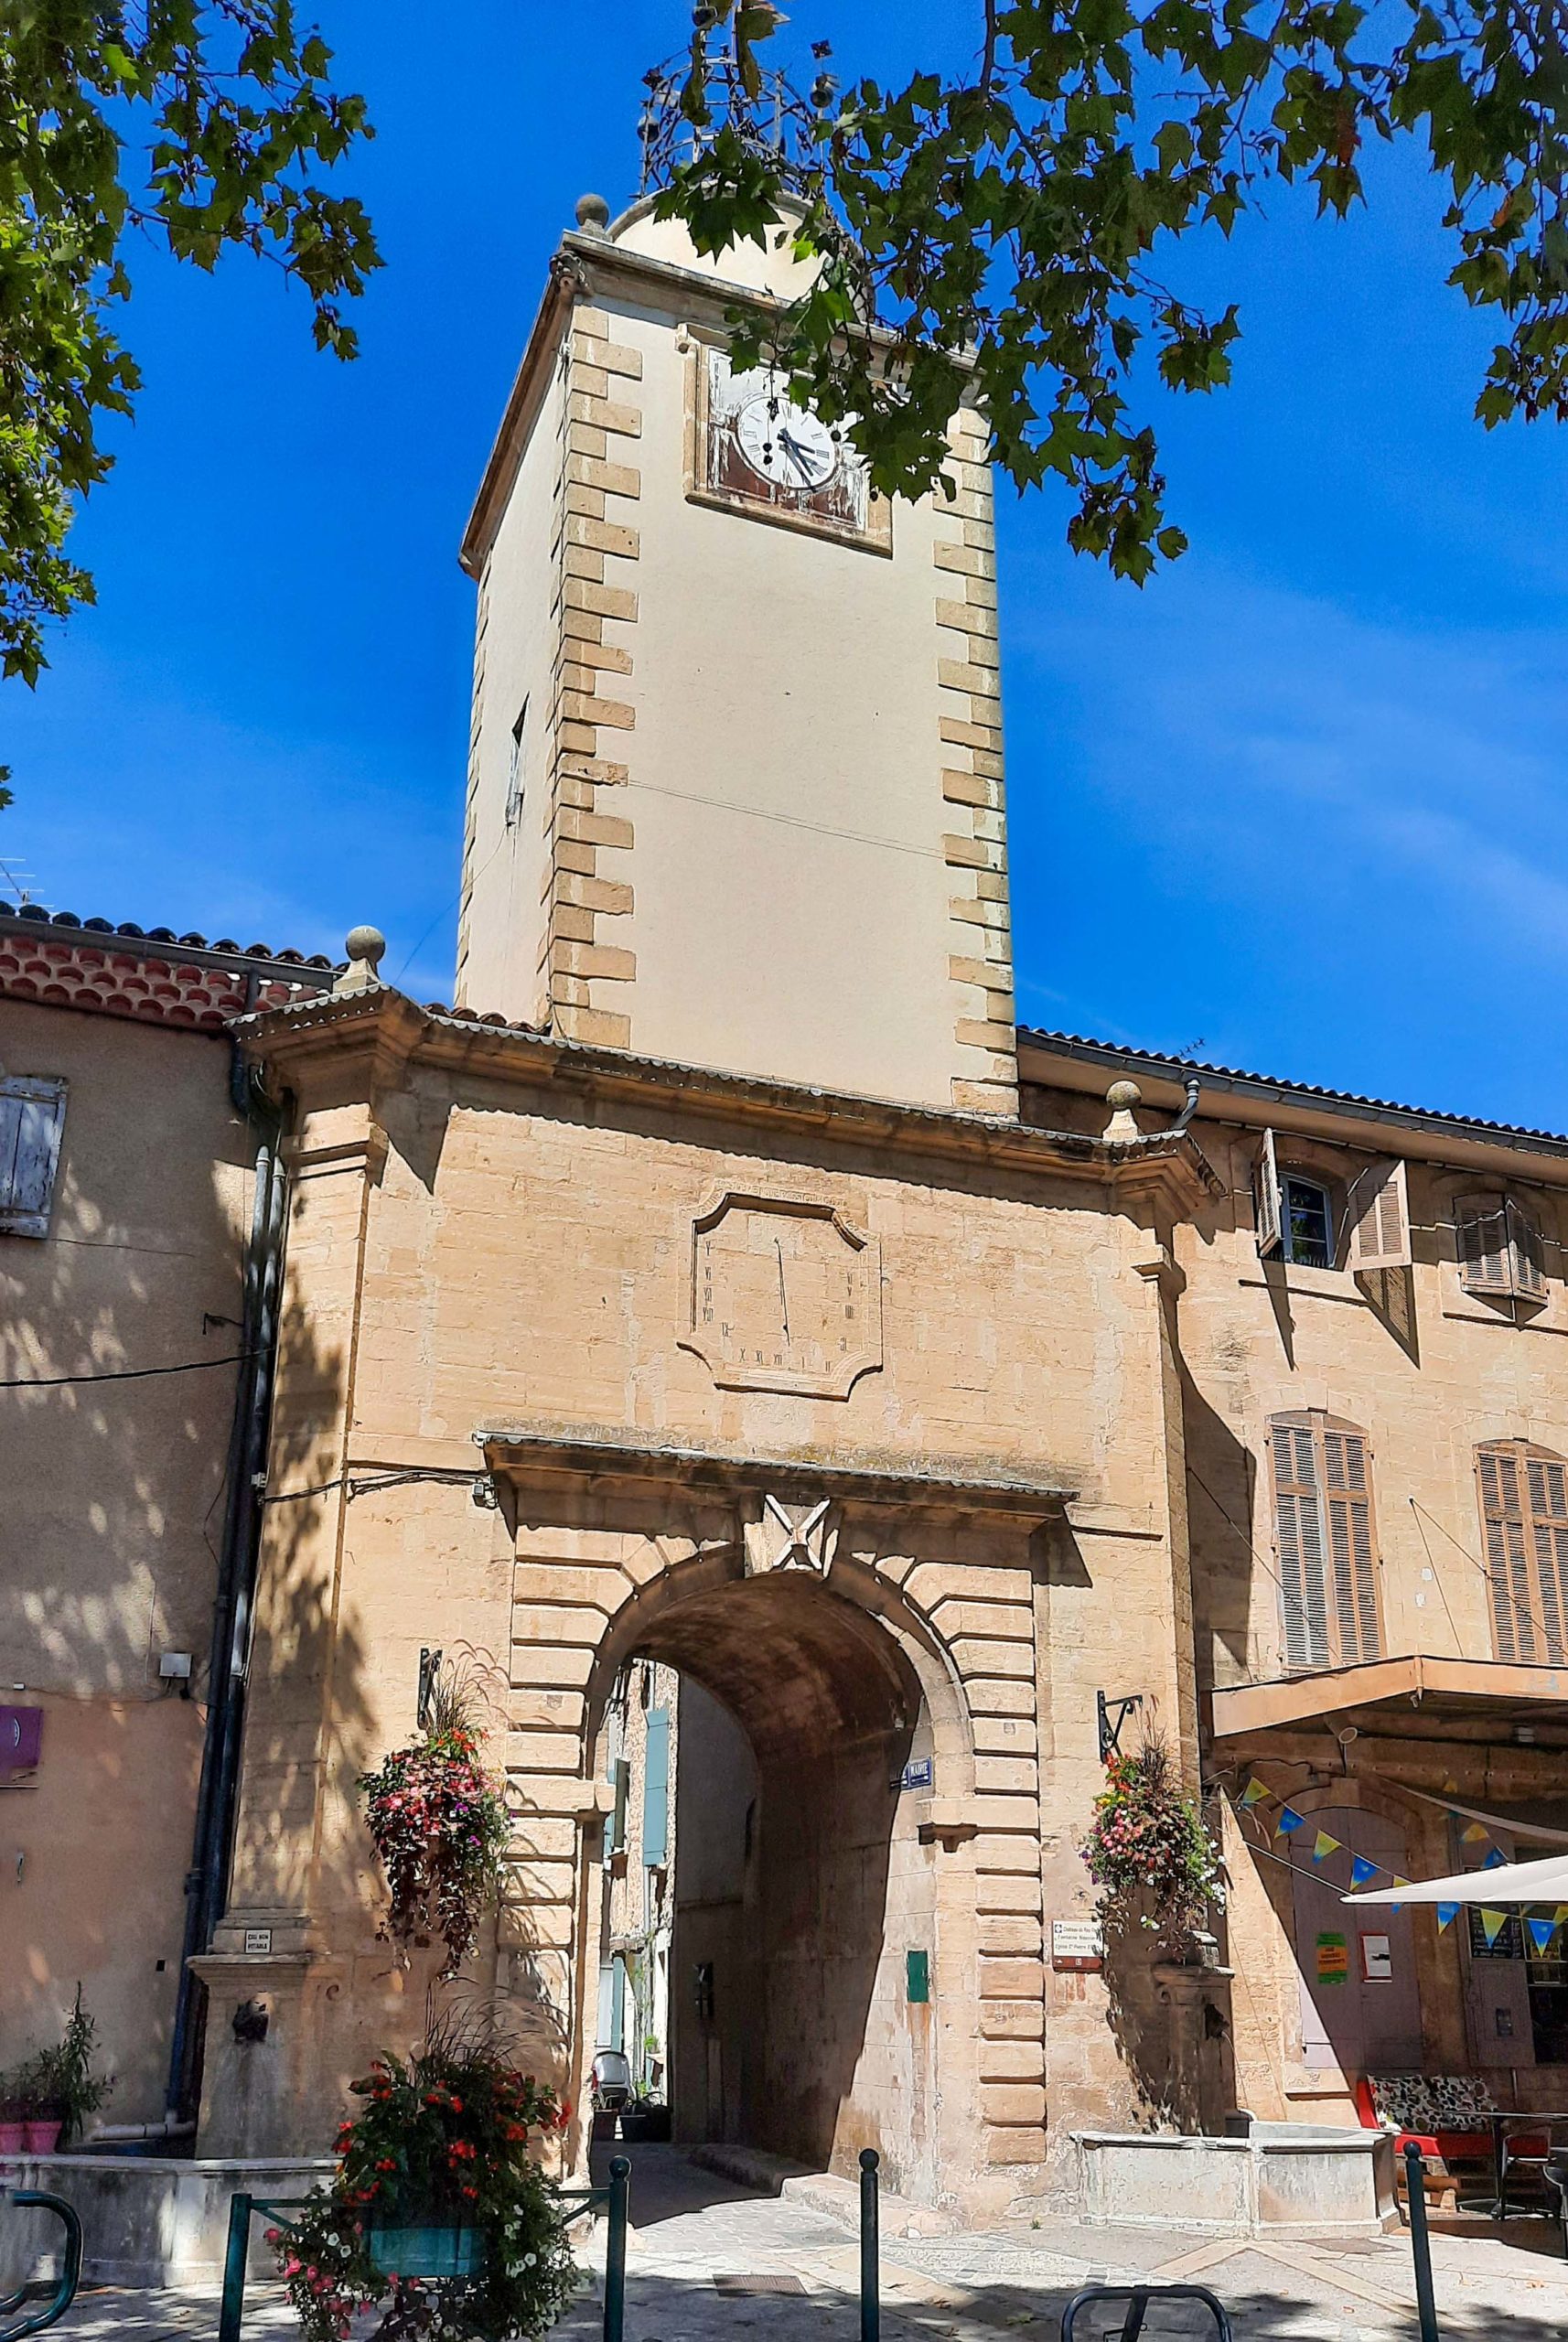 Tour de l'Horloge in Peyrolles-en-Provence © Mathieu BROSSAIS - licence [CC BY-SA 4.0] from Wikimedia Commons